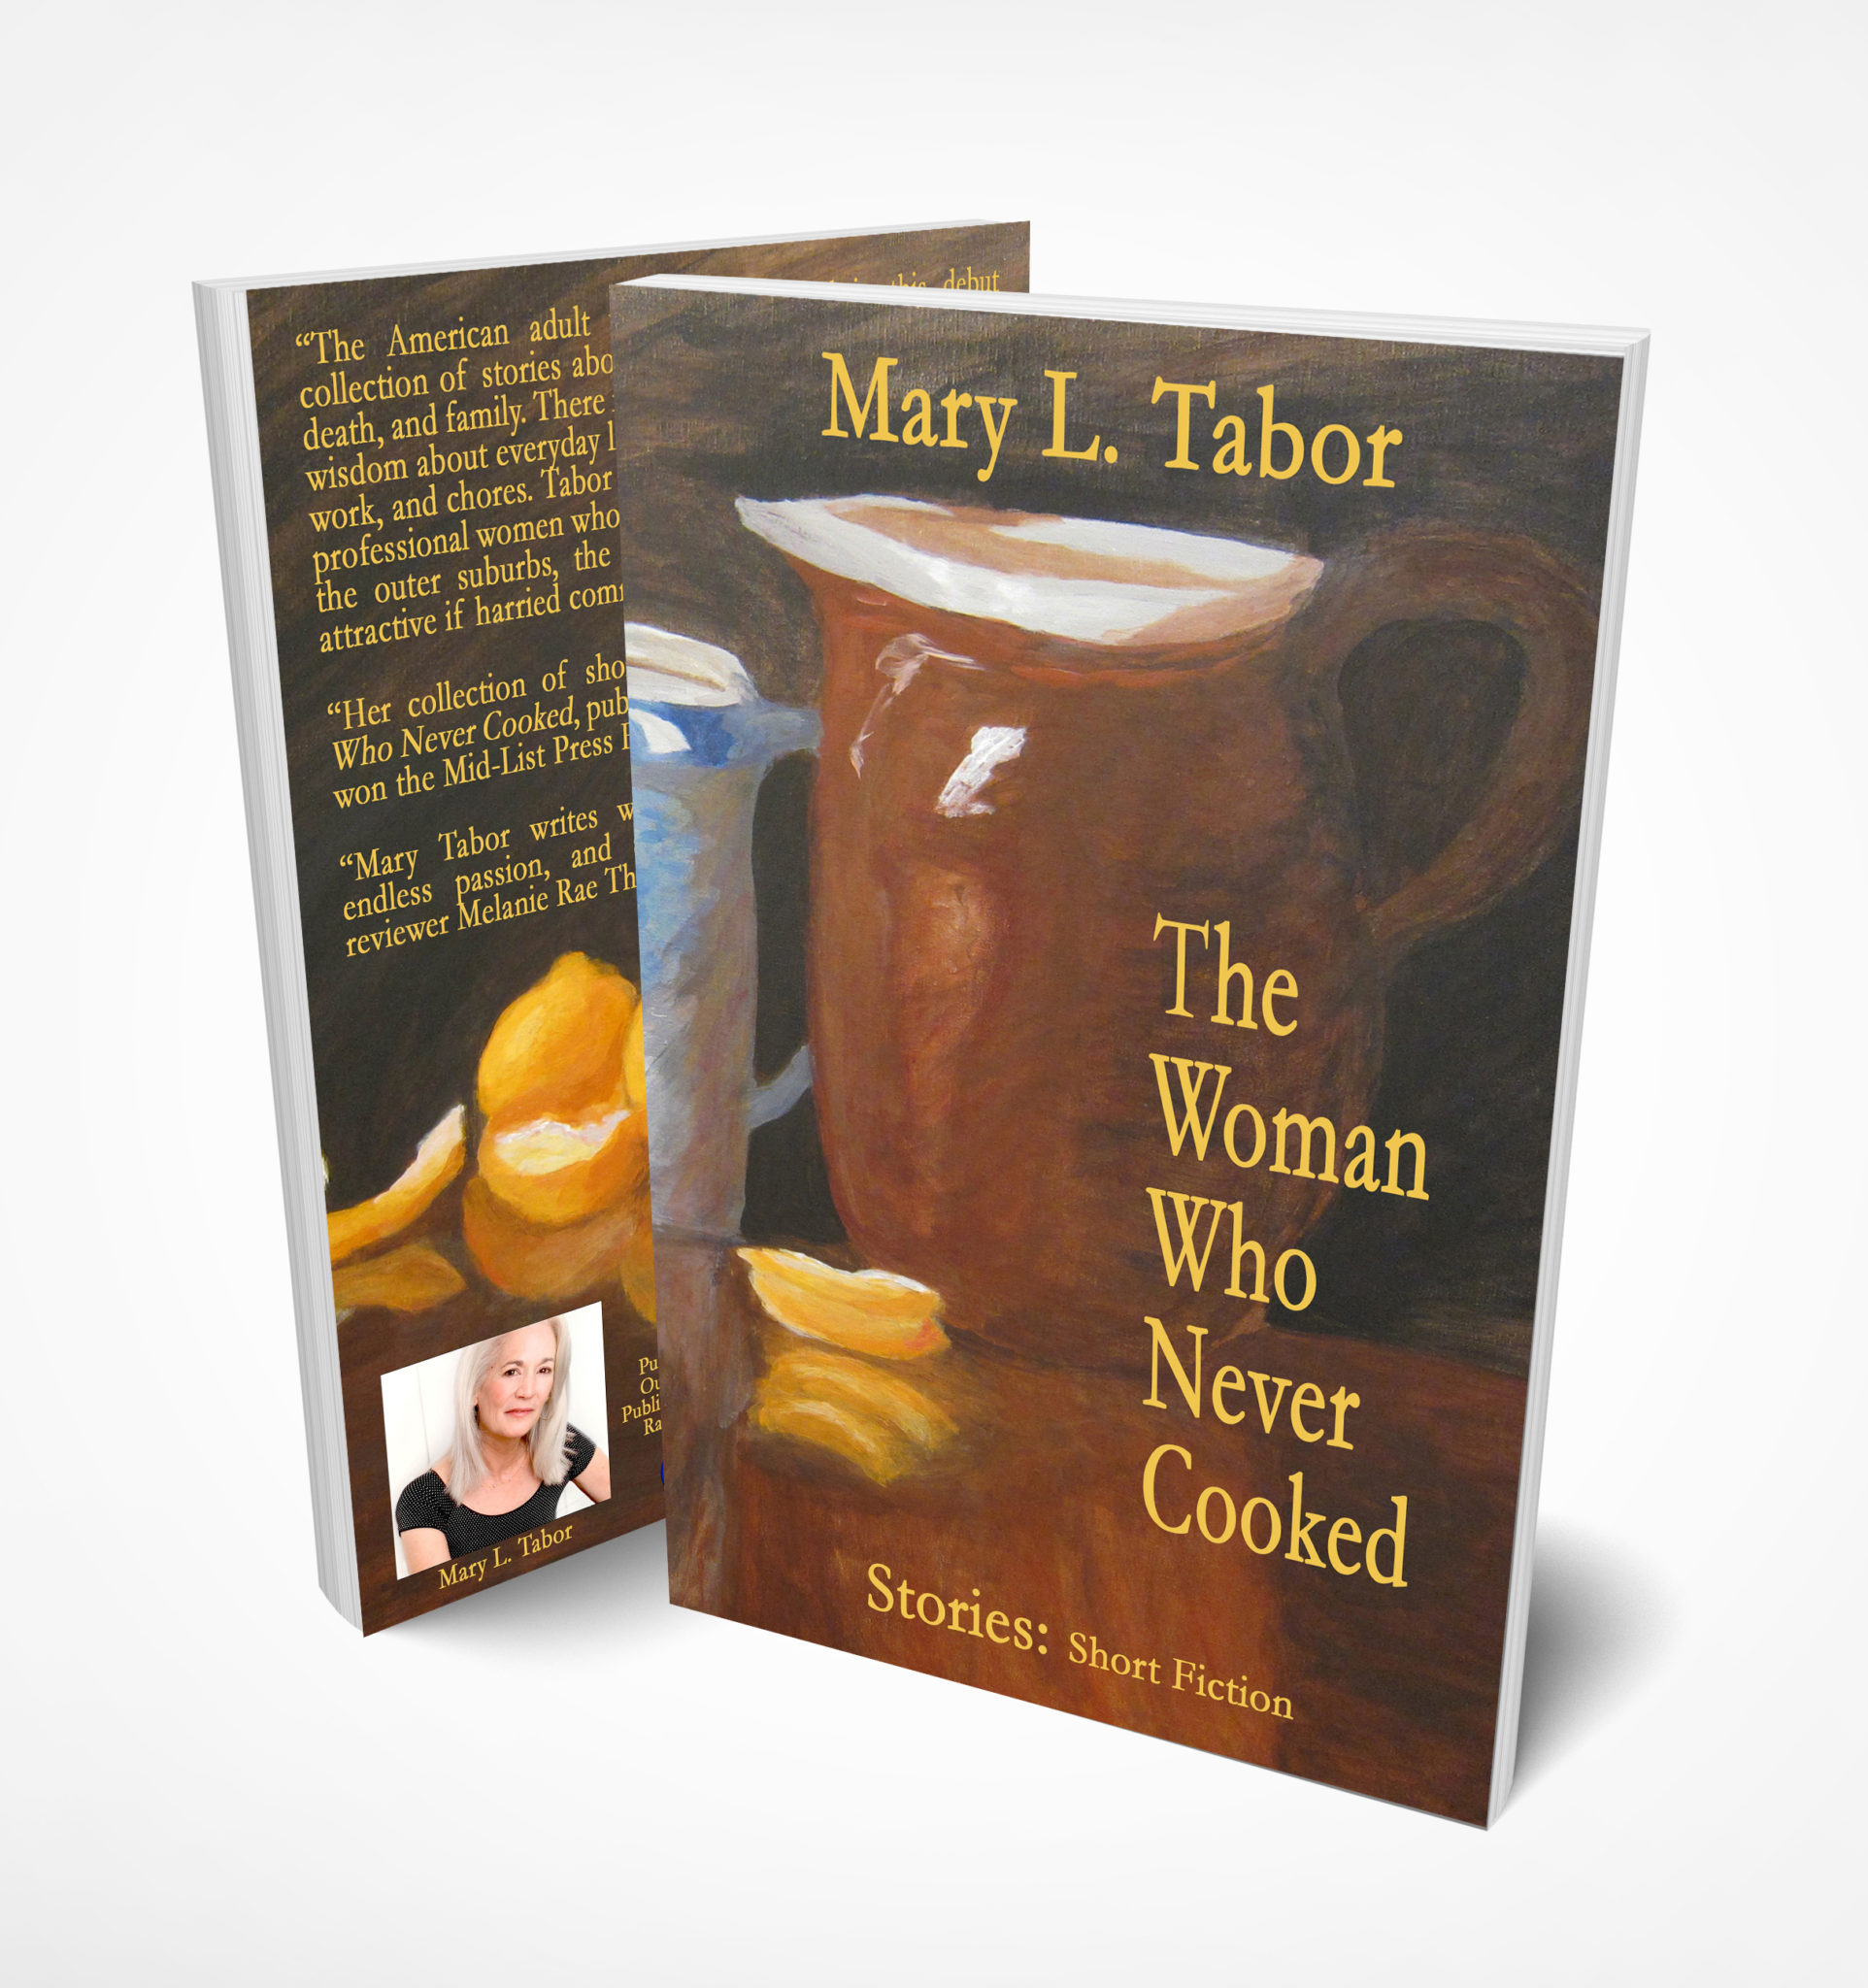 The Woman Who Never Cooked by Mary L. Tabor